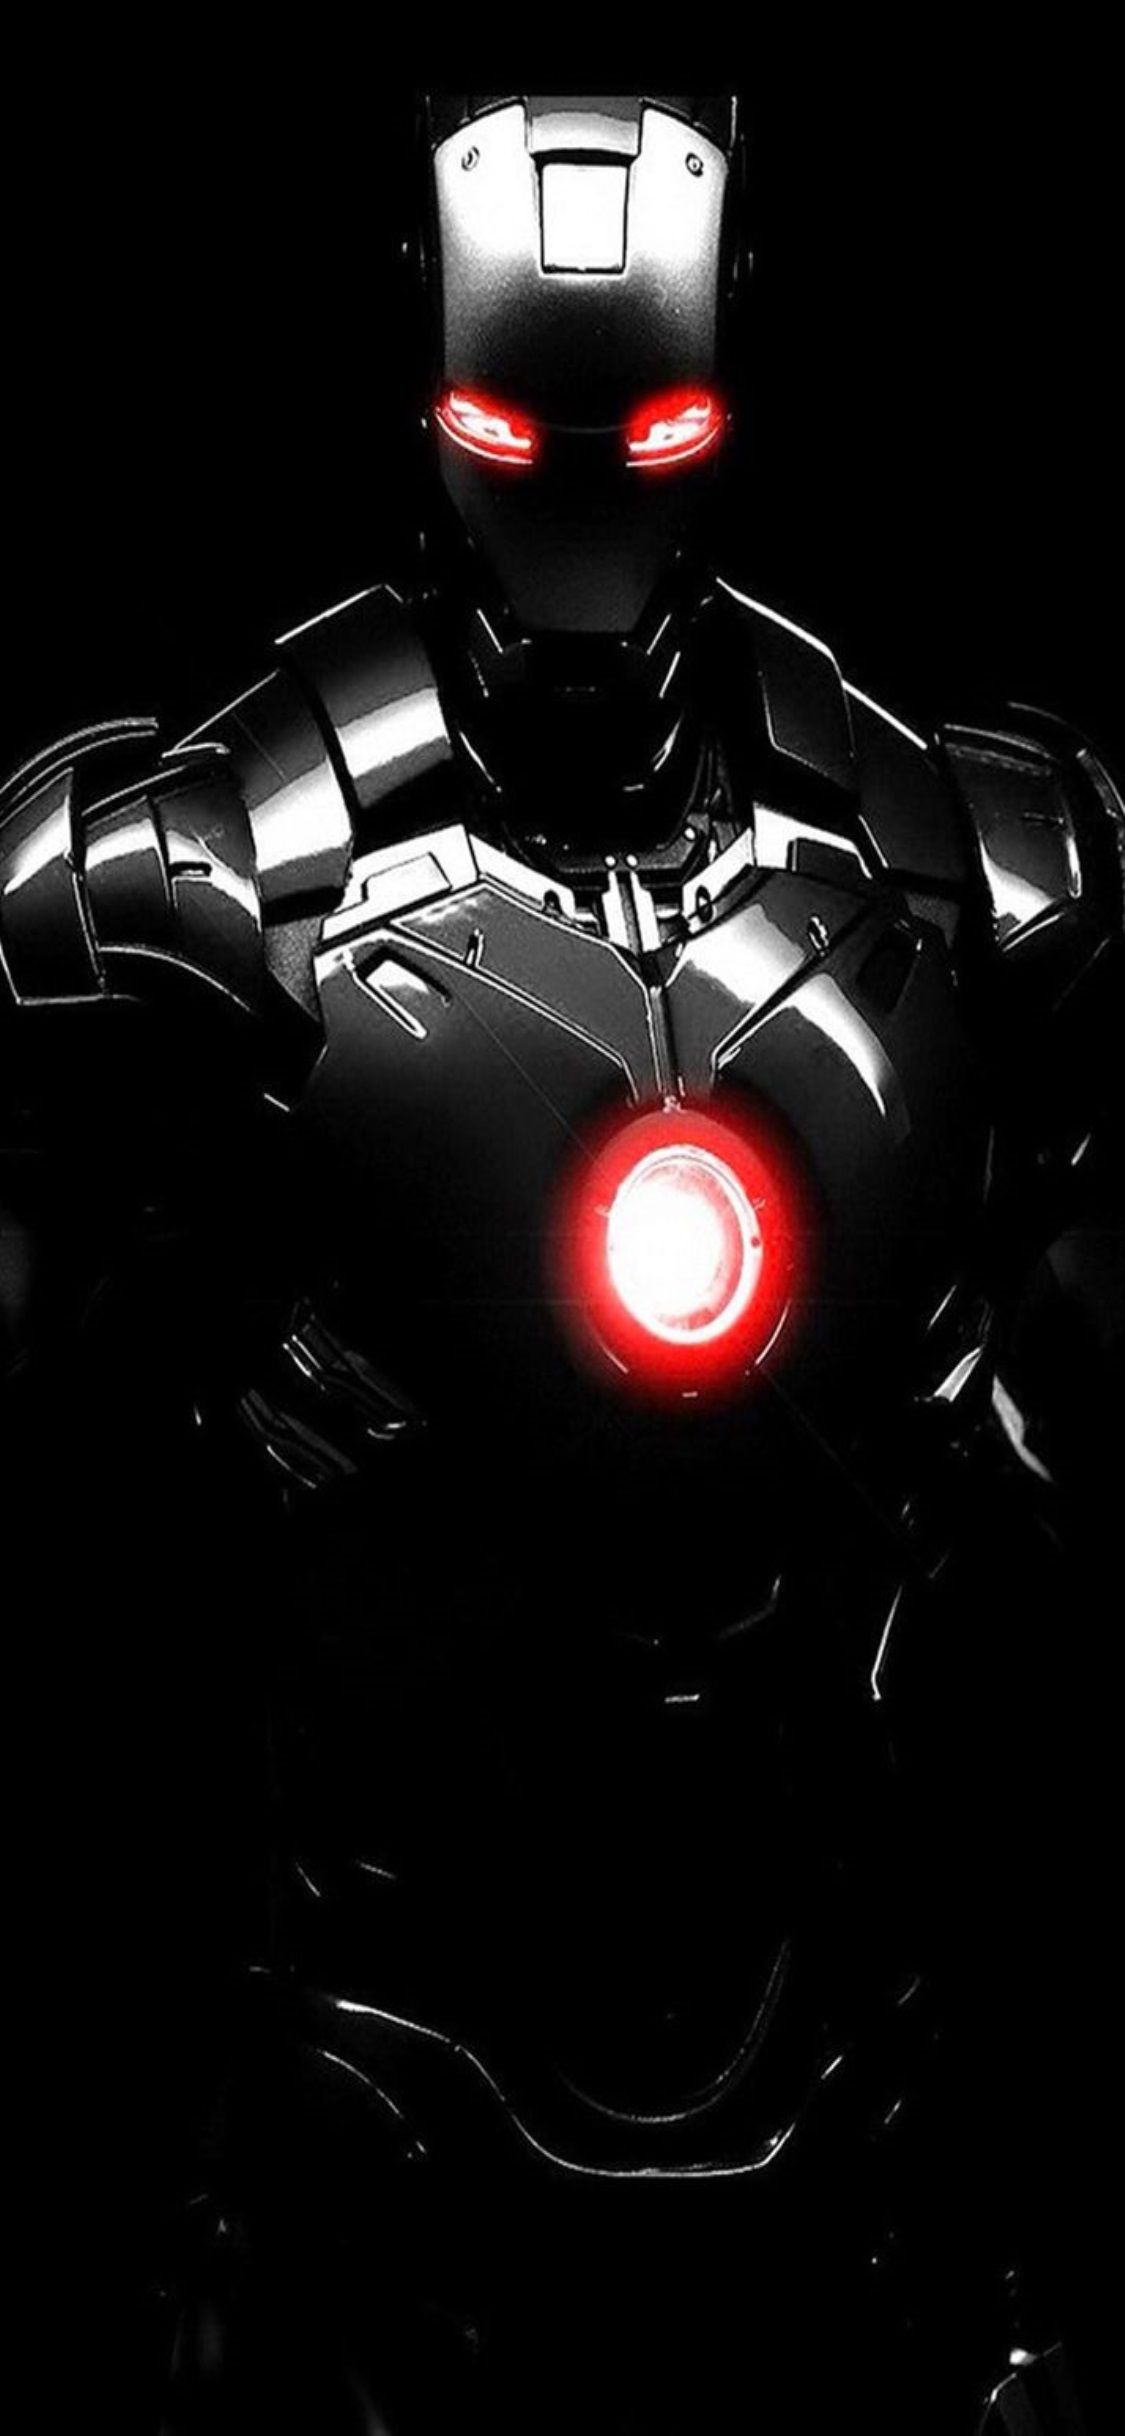 HD iPhone x wallpaper iron man and image collection for Desktop & Mobile. Free wallpaper download